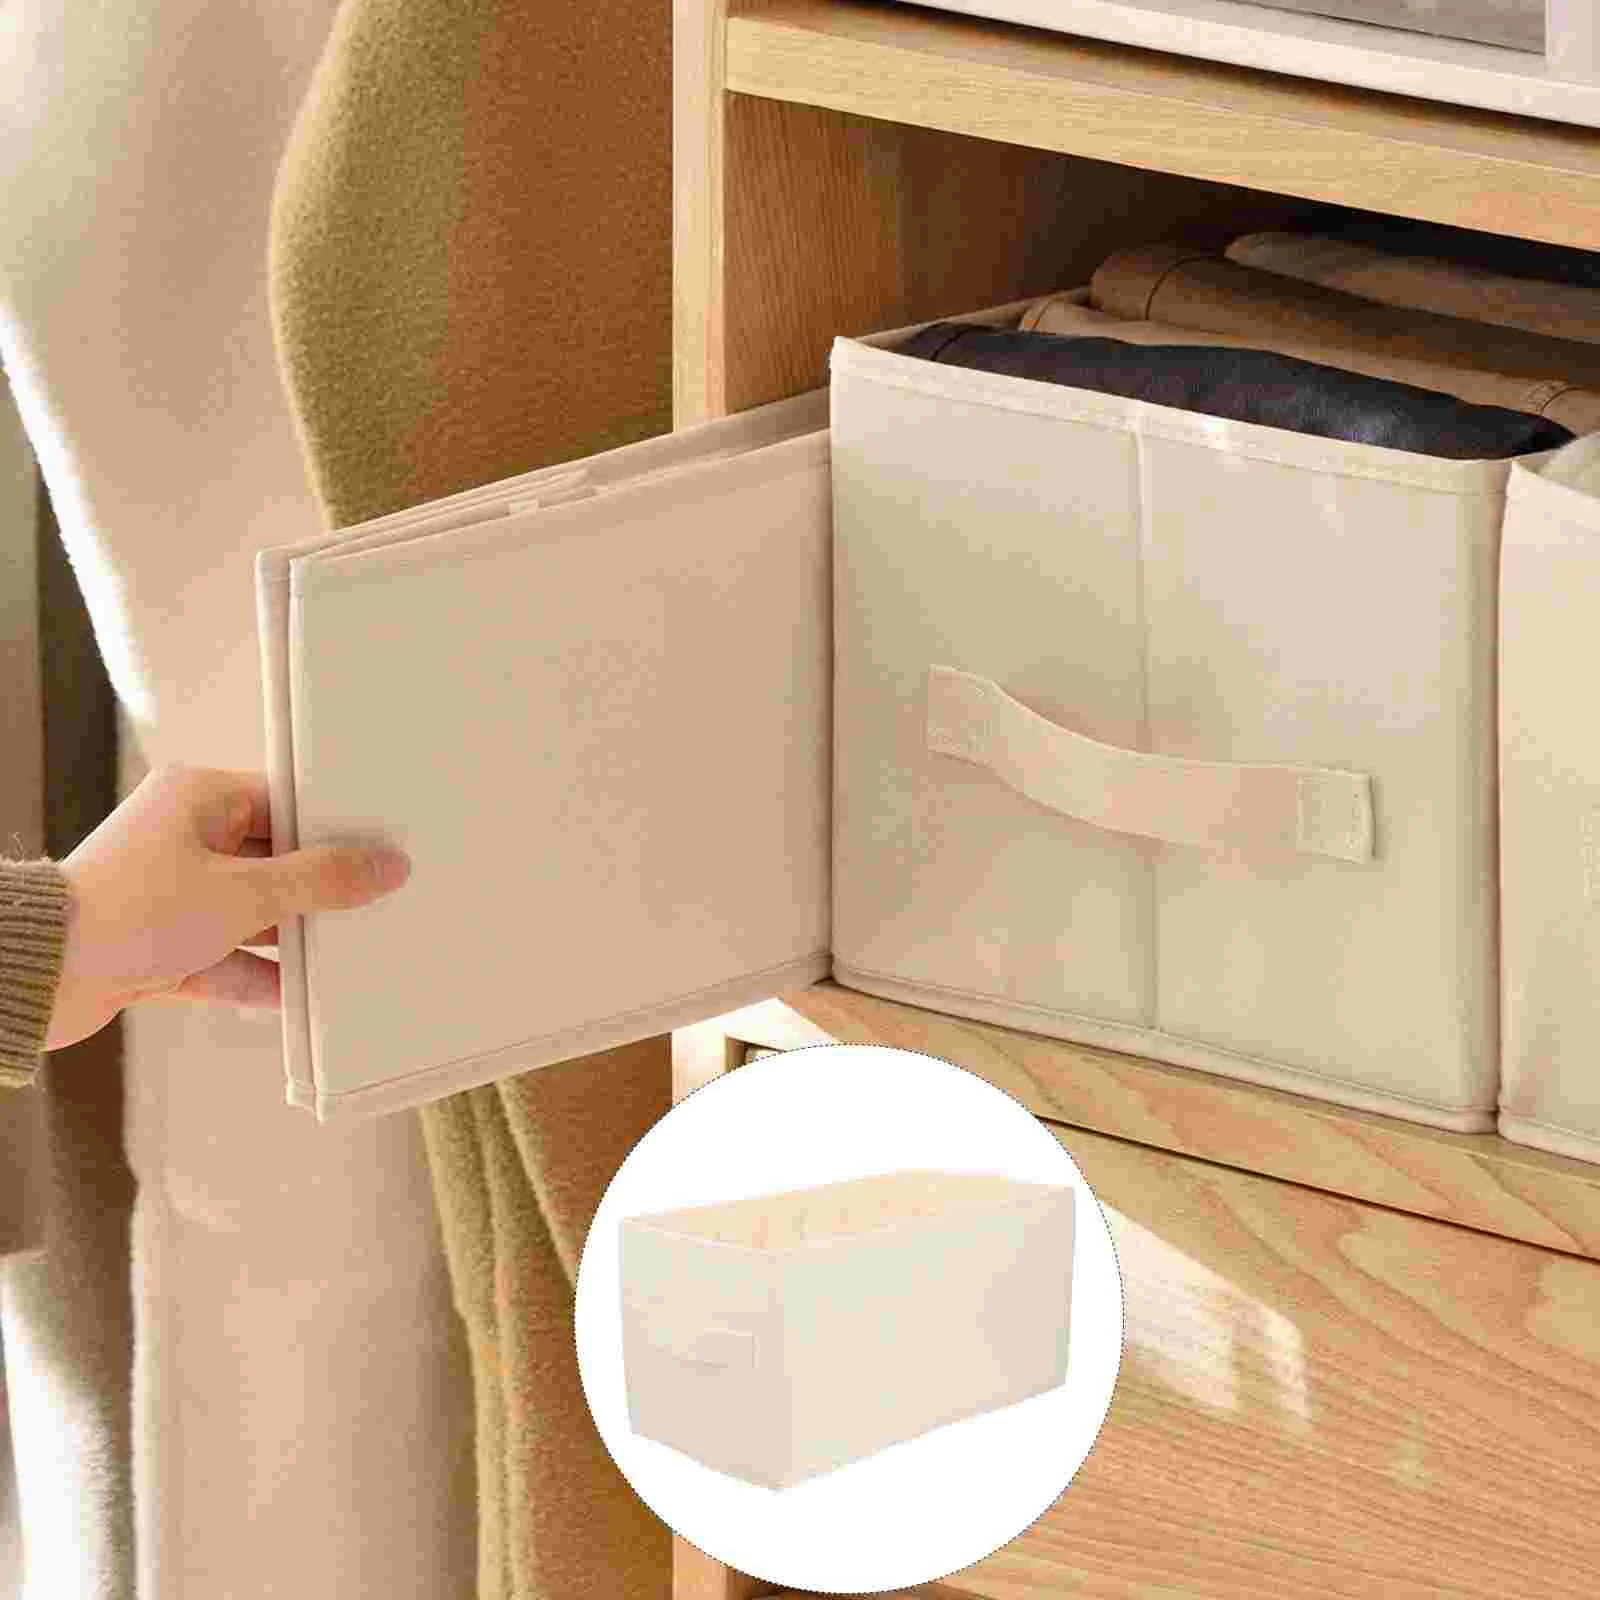 

Organizer Storage Clothes Closet Pants Drawer Divider Foldable Containers Wardrobe Box Clothing Compartment Basket Bins Bin